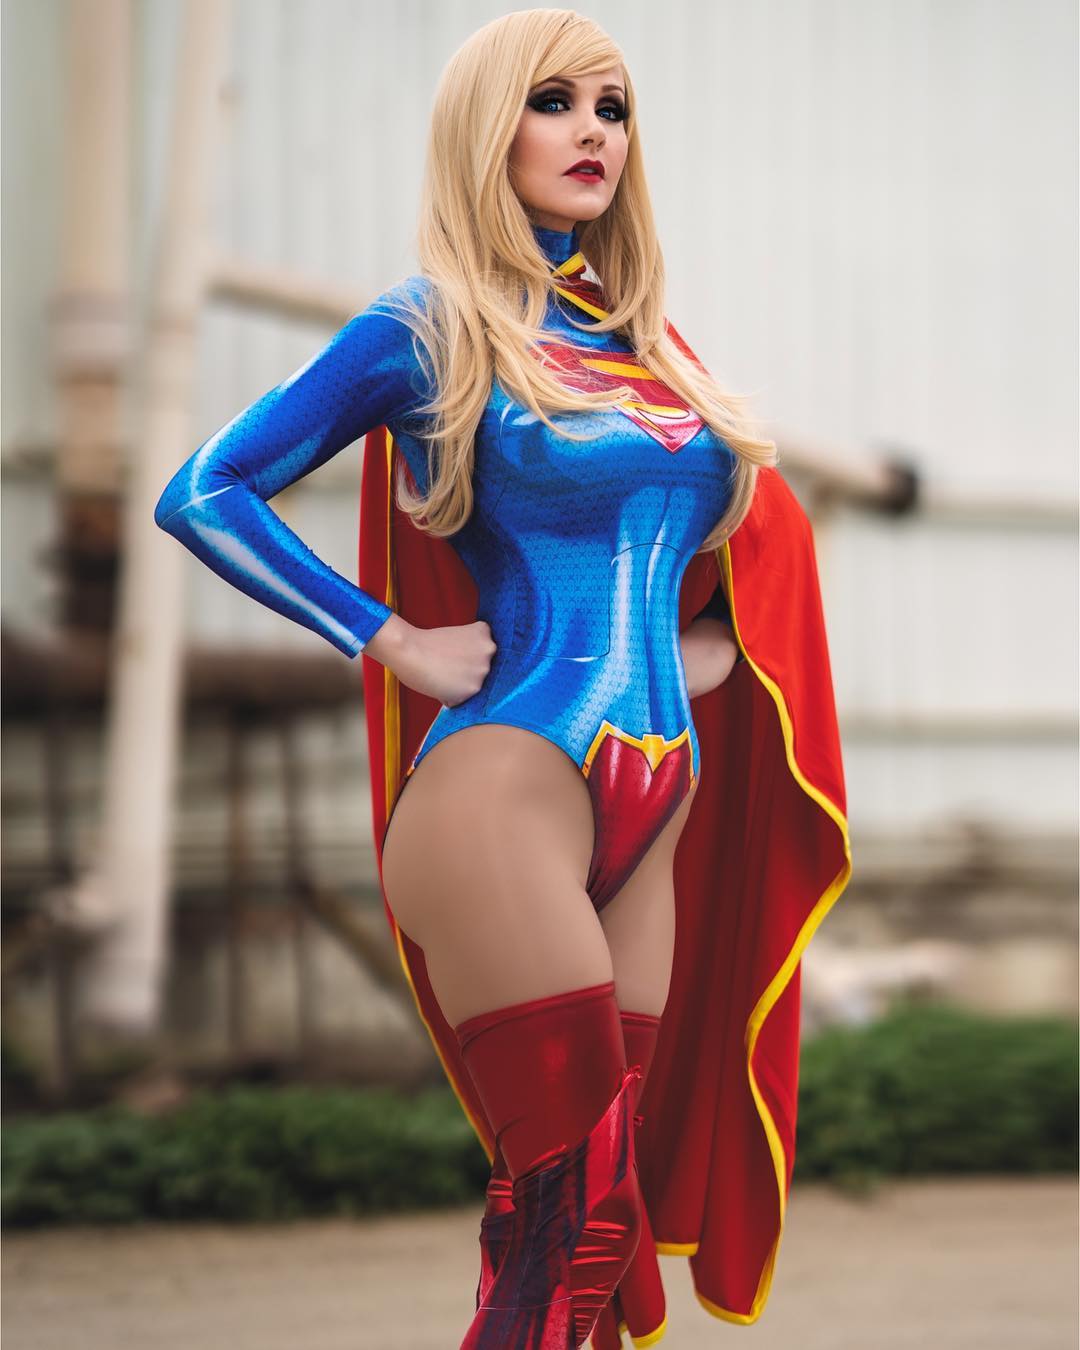 Supergirl #supergirl #cosplay Cosplayer: @AngieMGriffin - https://t.co/bnsq...